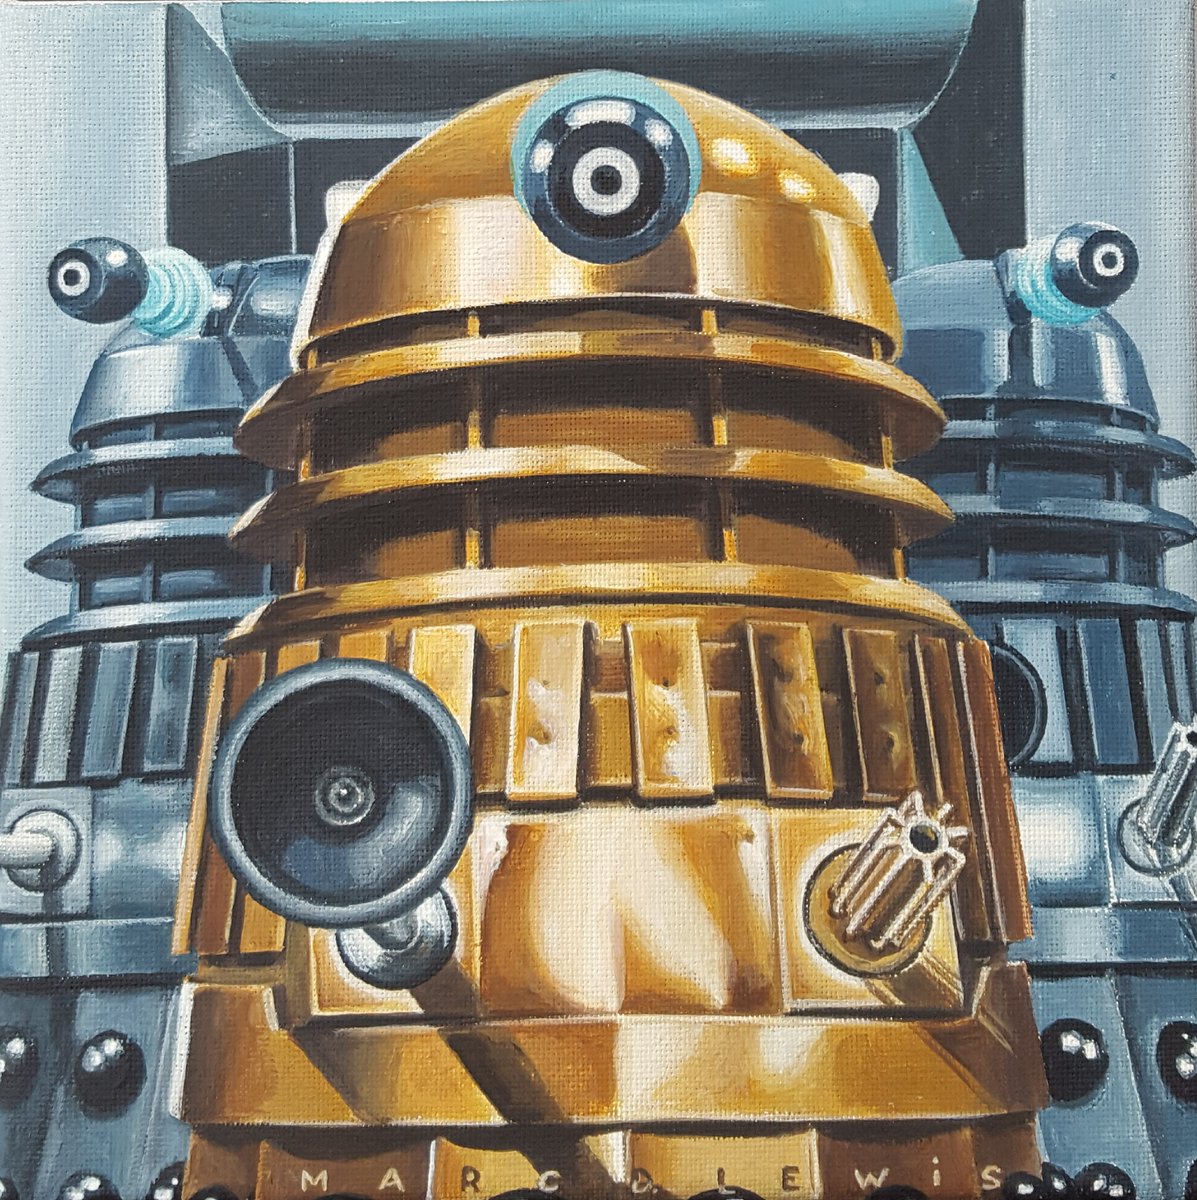 'Whoever is operating the time machine is an enemy of the Daleks. All enemies of the Daleks must be destroyed! Exterminate them!' marcdlewisart.etsy.com #DoctorWho #DrWho #DoctorWhoFanArt #DayOfTheDaleks #CanvasArt #painting #illustration #art